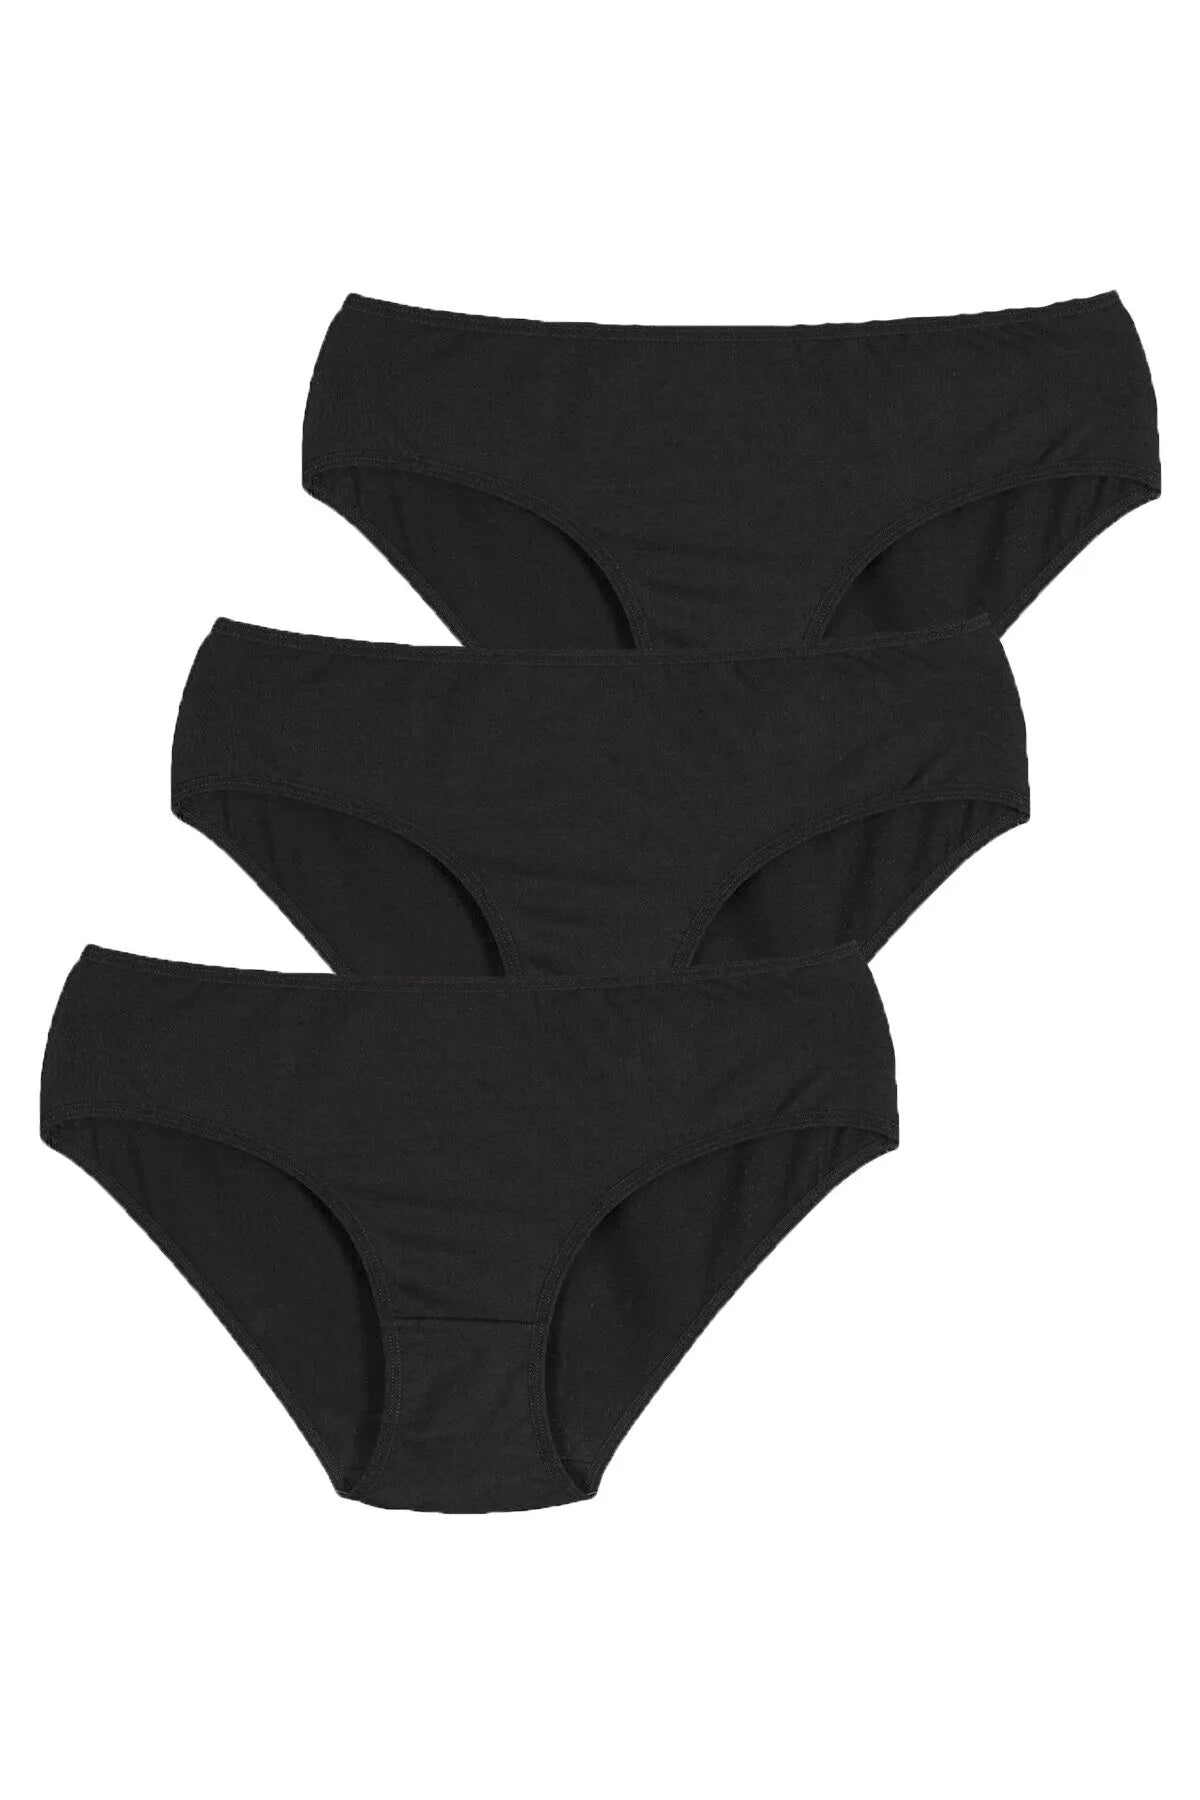 Cover 3-Piece Black Slip Panties: Elevate Your Comfort and Style